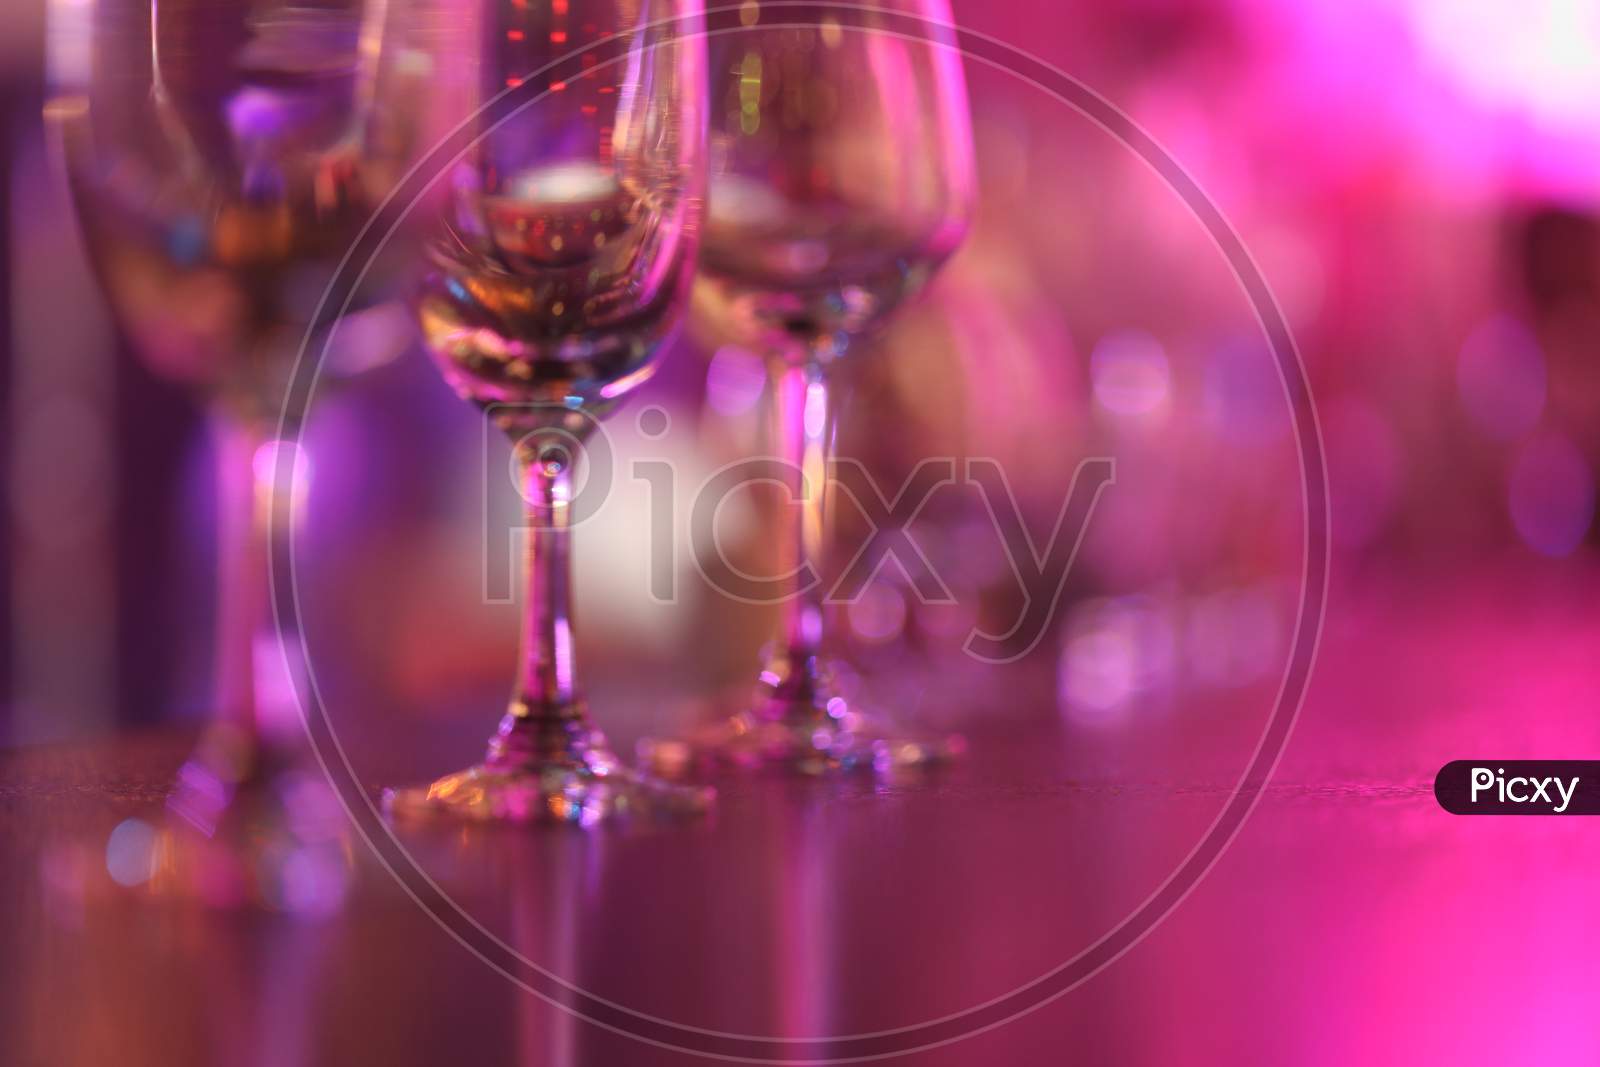 Wine Glasses In an Pub With Neon Lights Flare